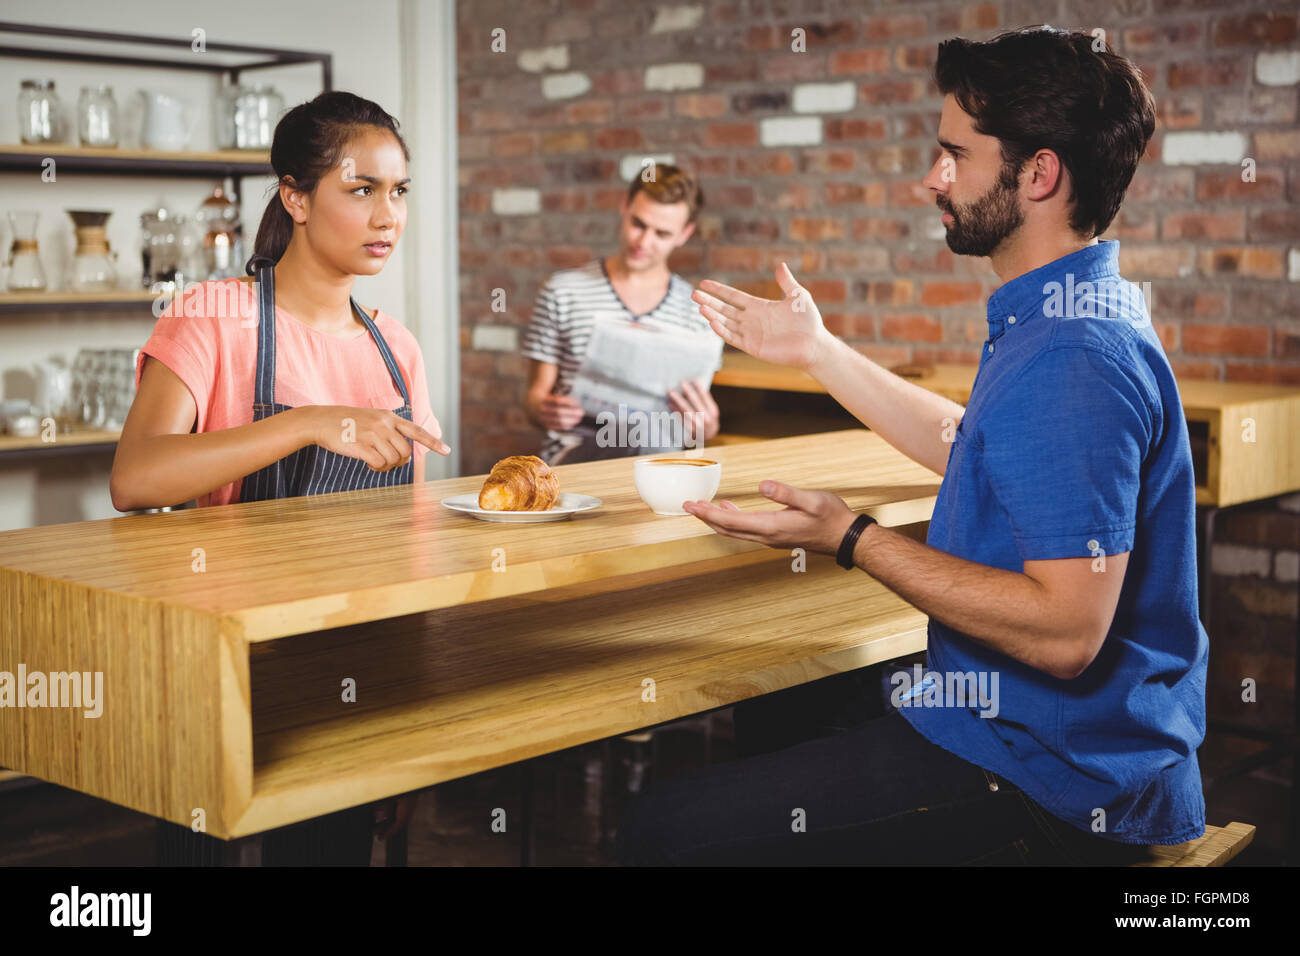 Unhappy customer complaining about the croissant Stock Photo